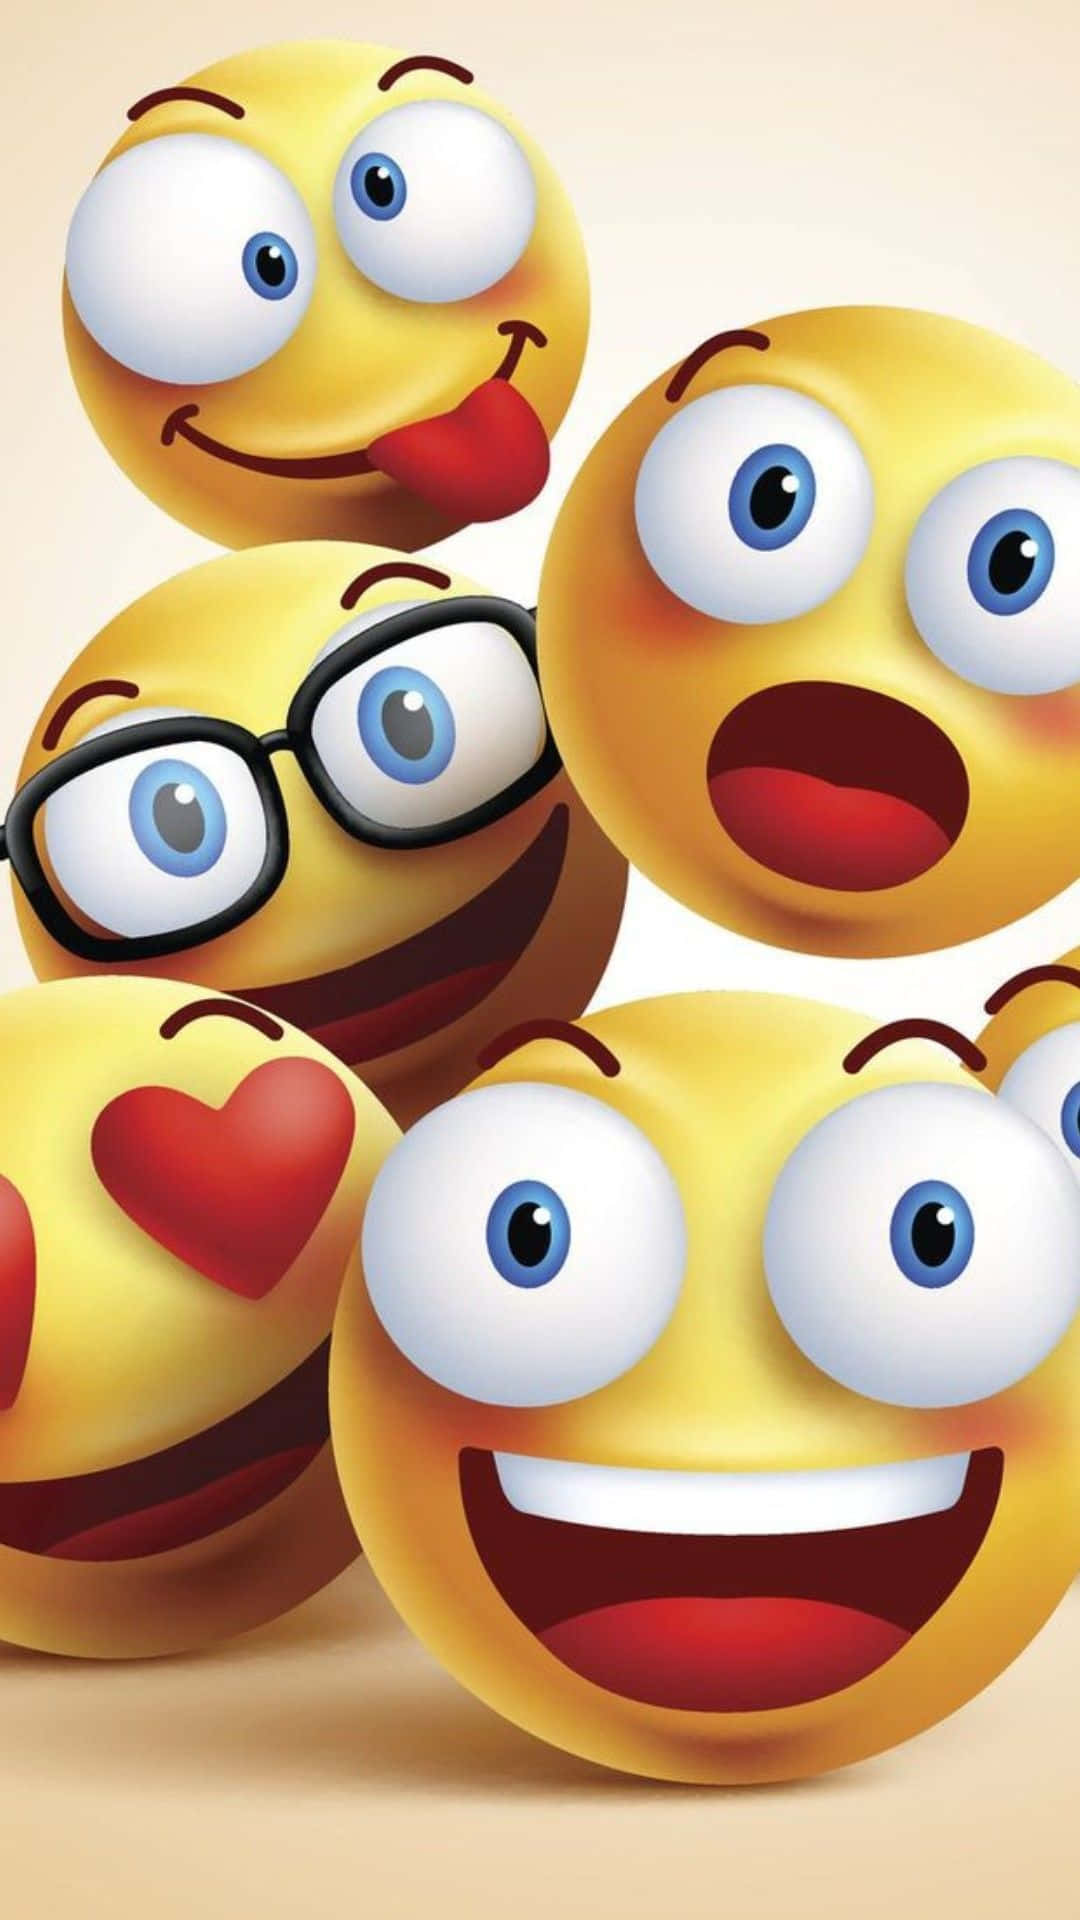 A Group Of Smiling Emoticions With Different Faces Wallpaper